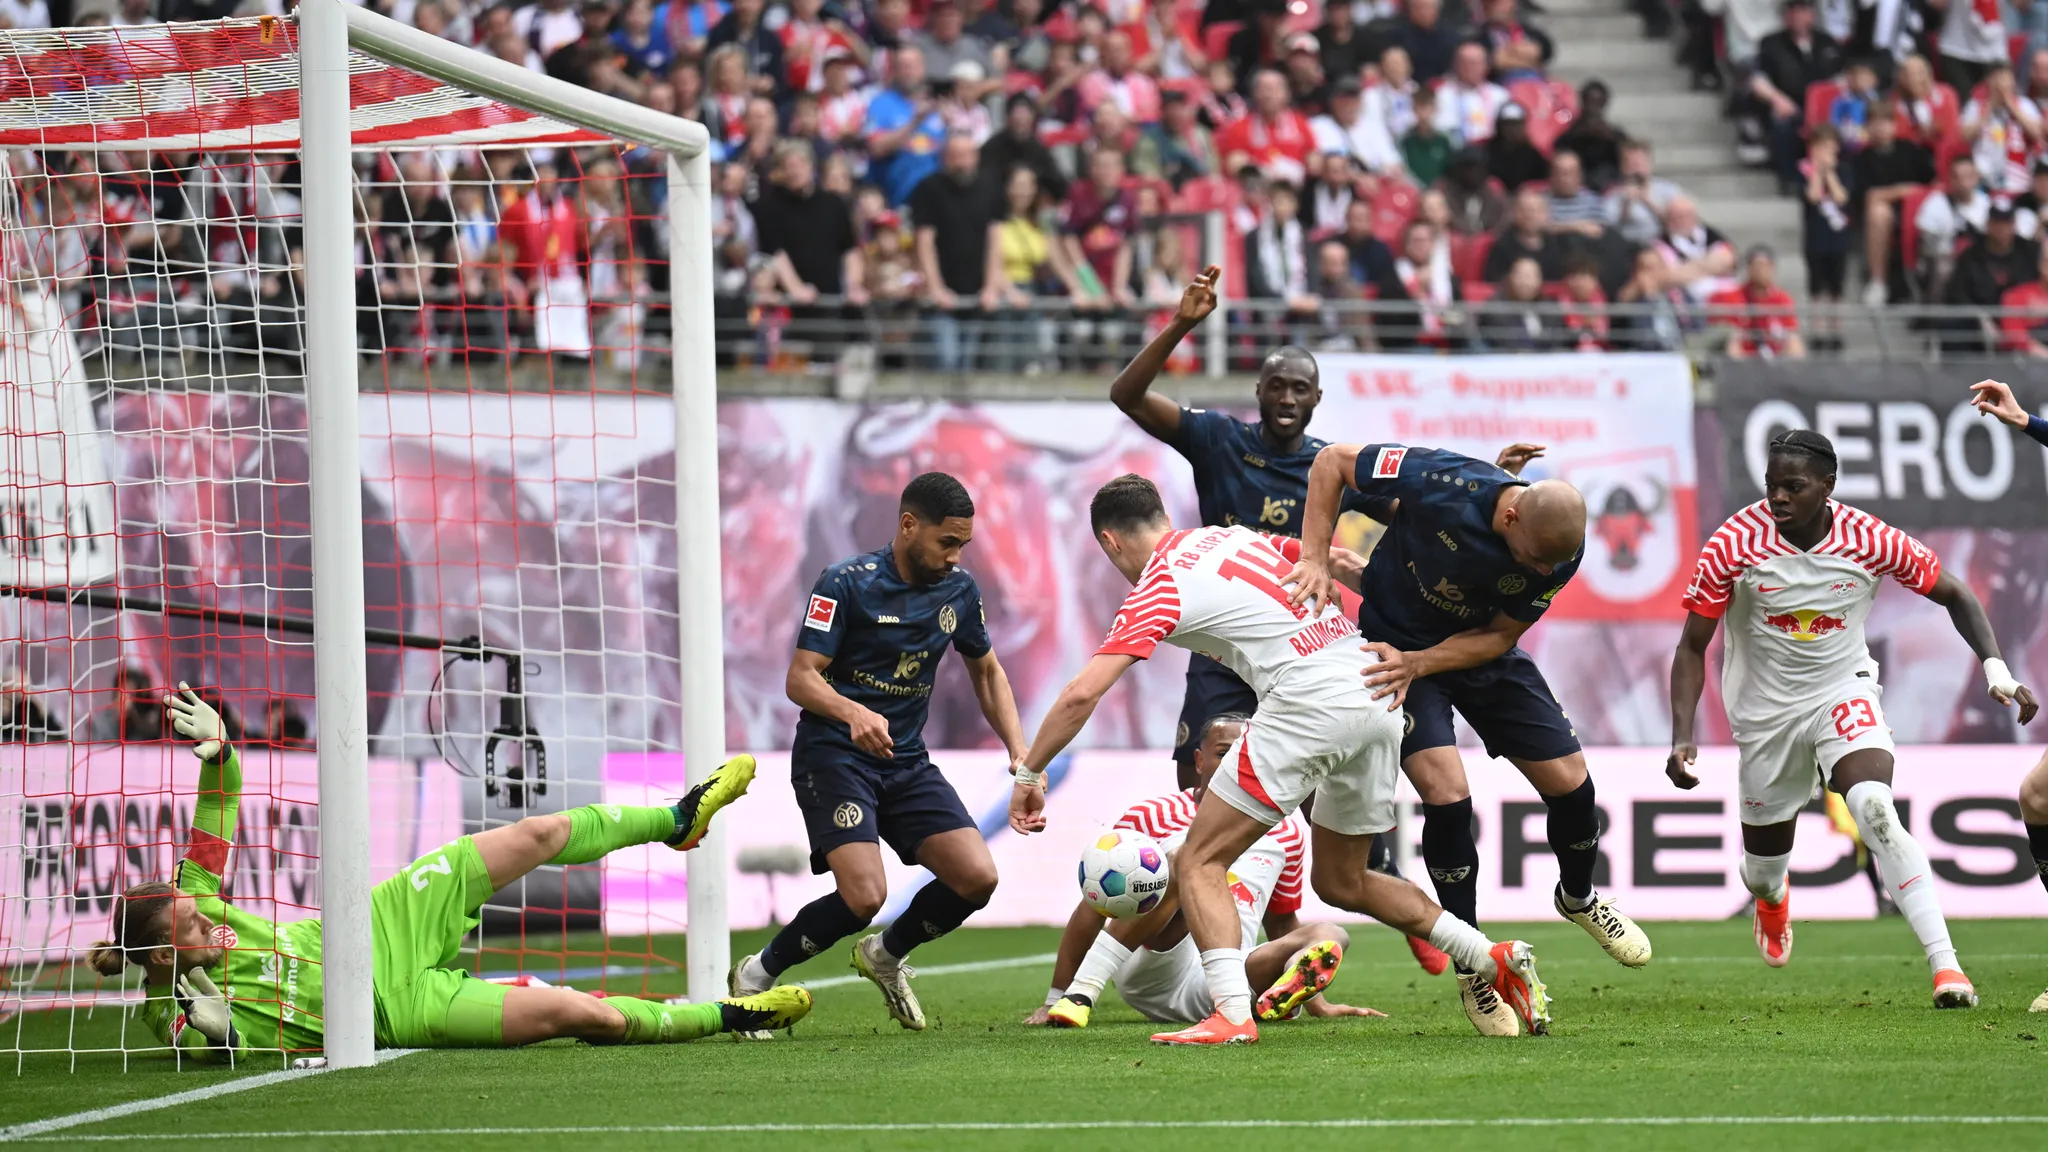 Leipzig chances arrived in the Mainz penalty area on several occasions.